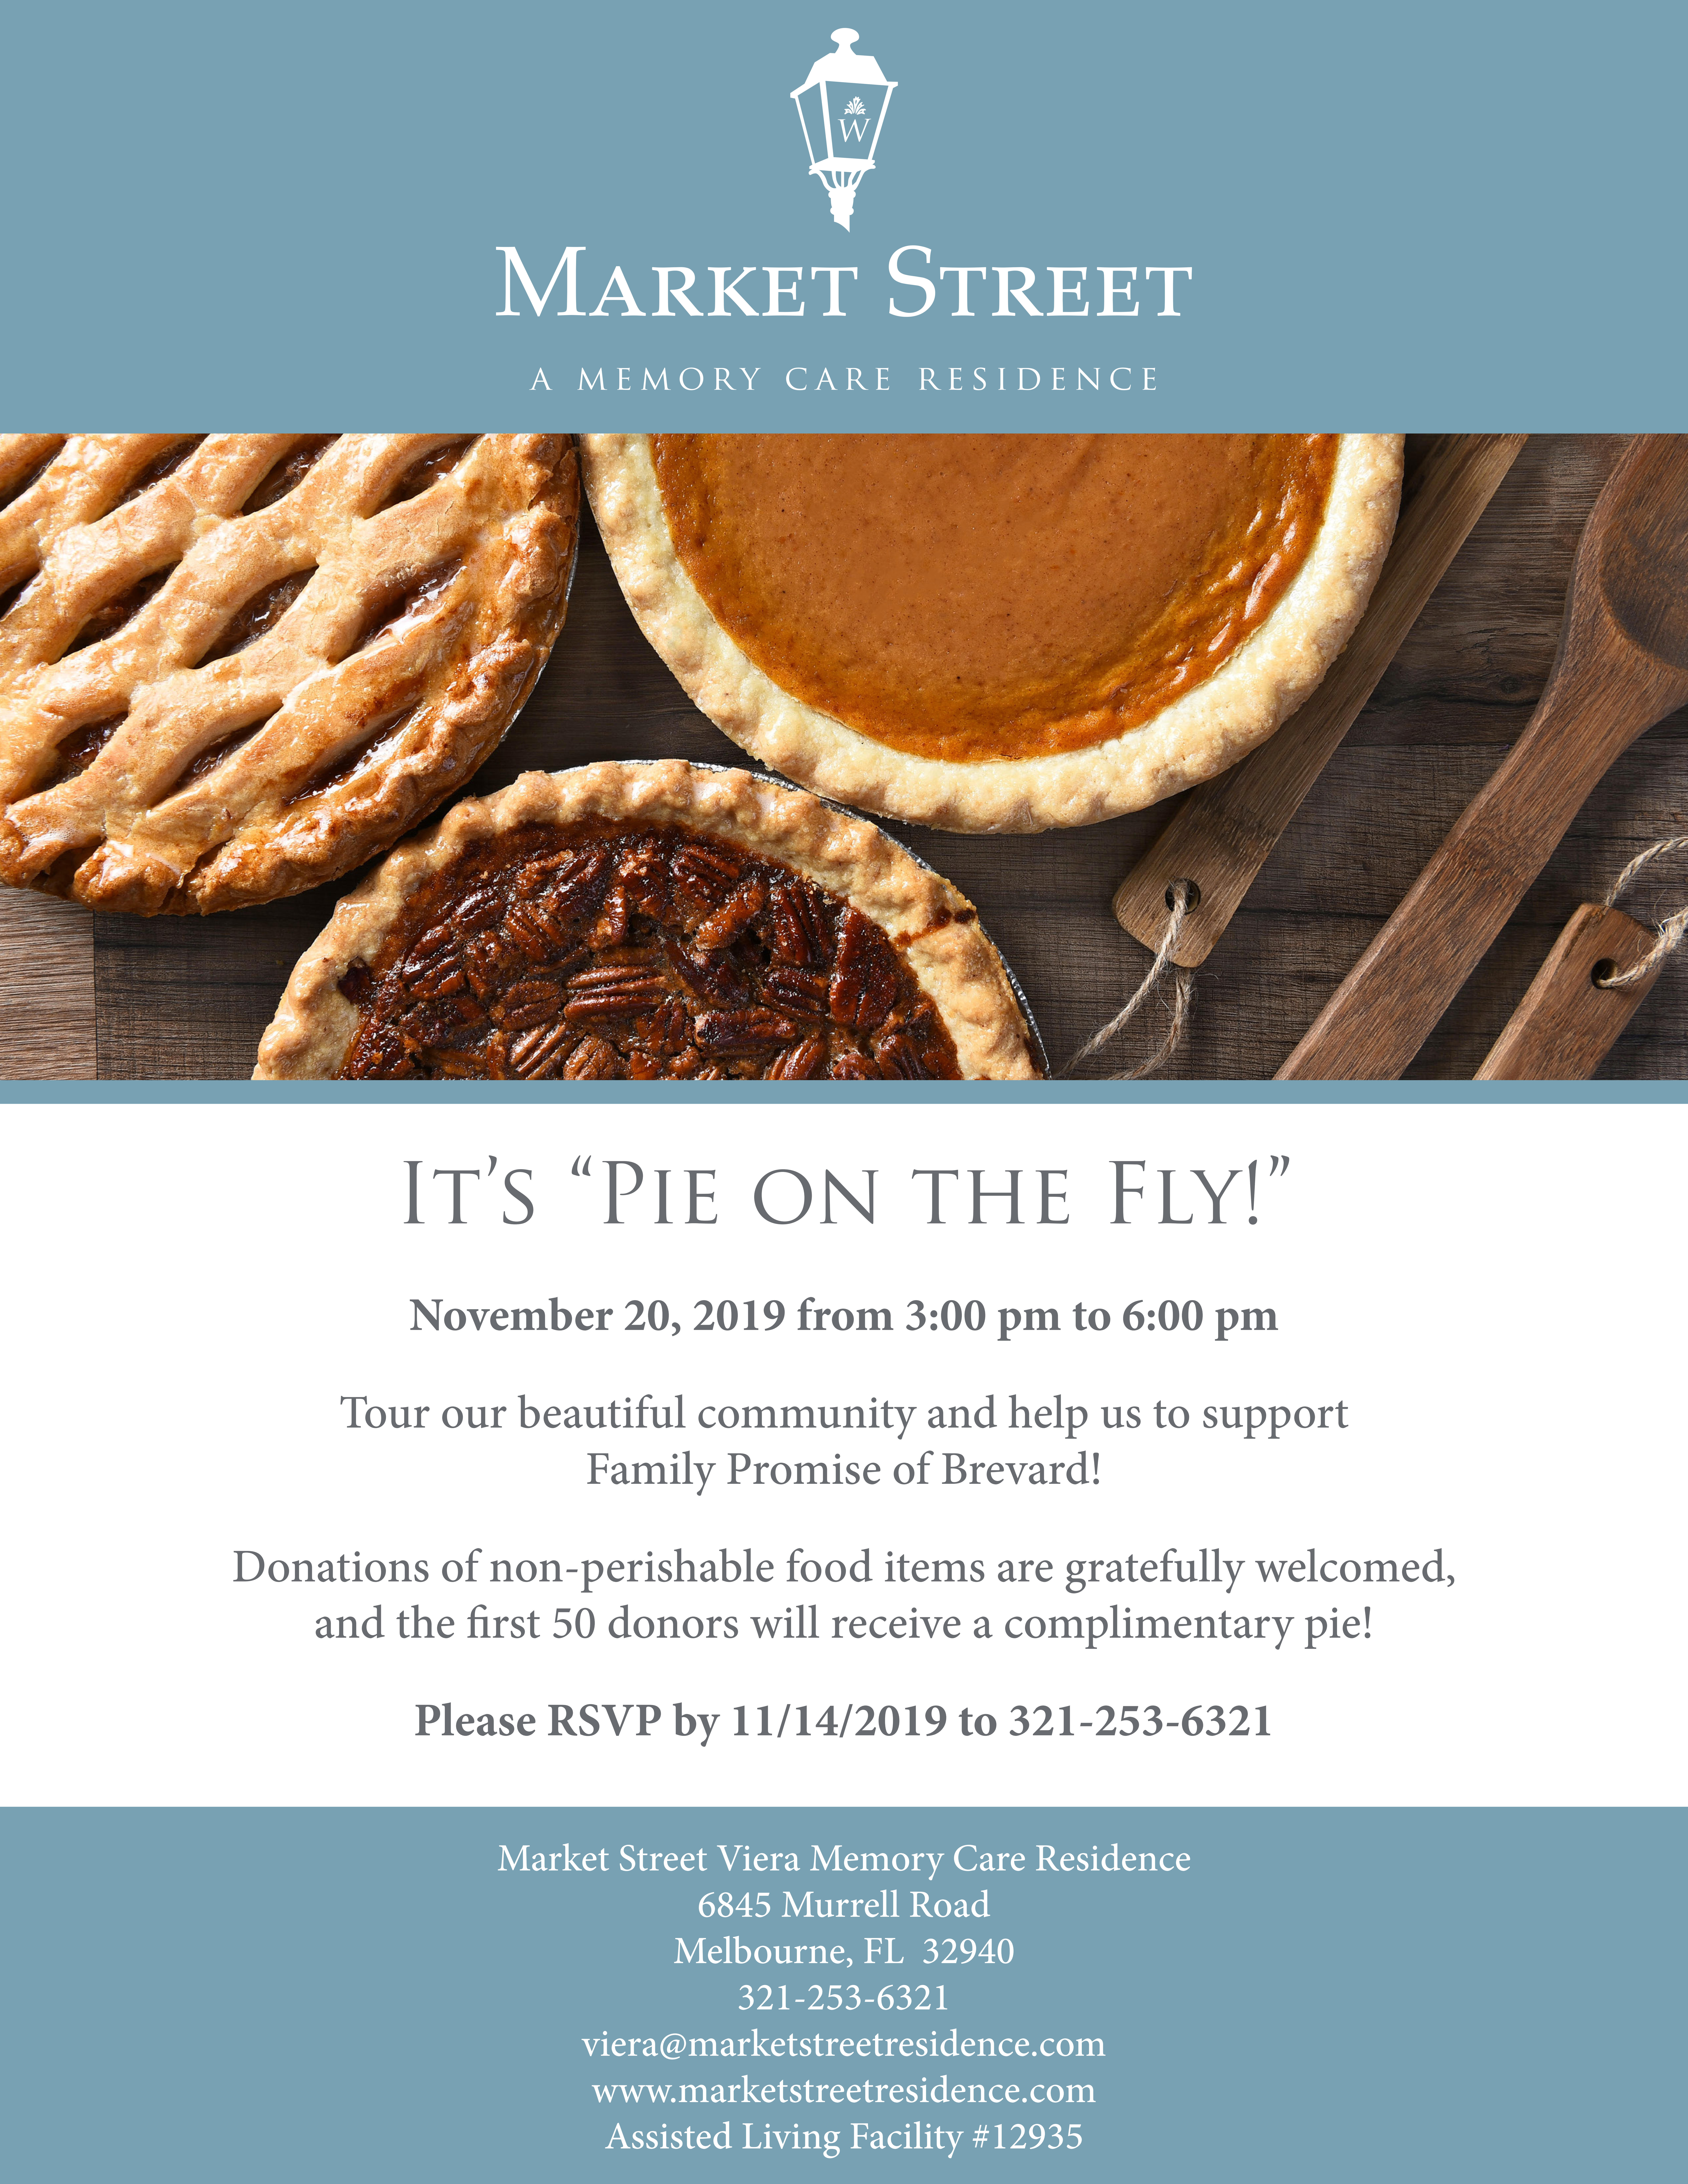 It's "Pie on the Fly!" at Market Street